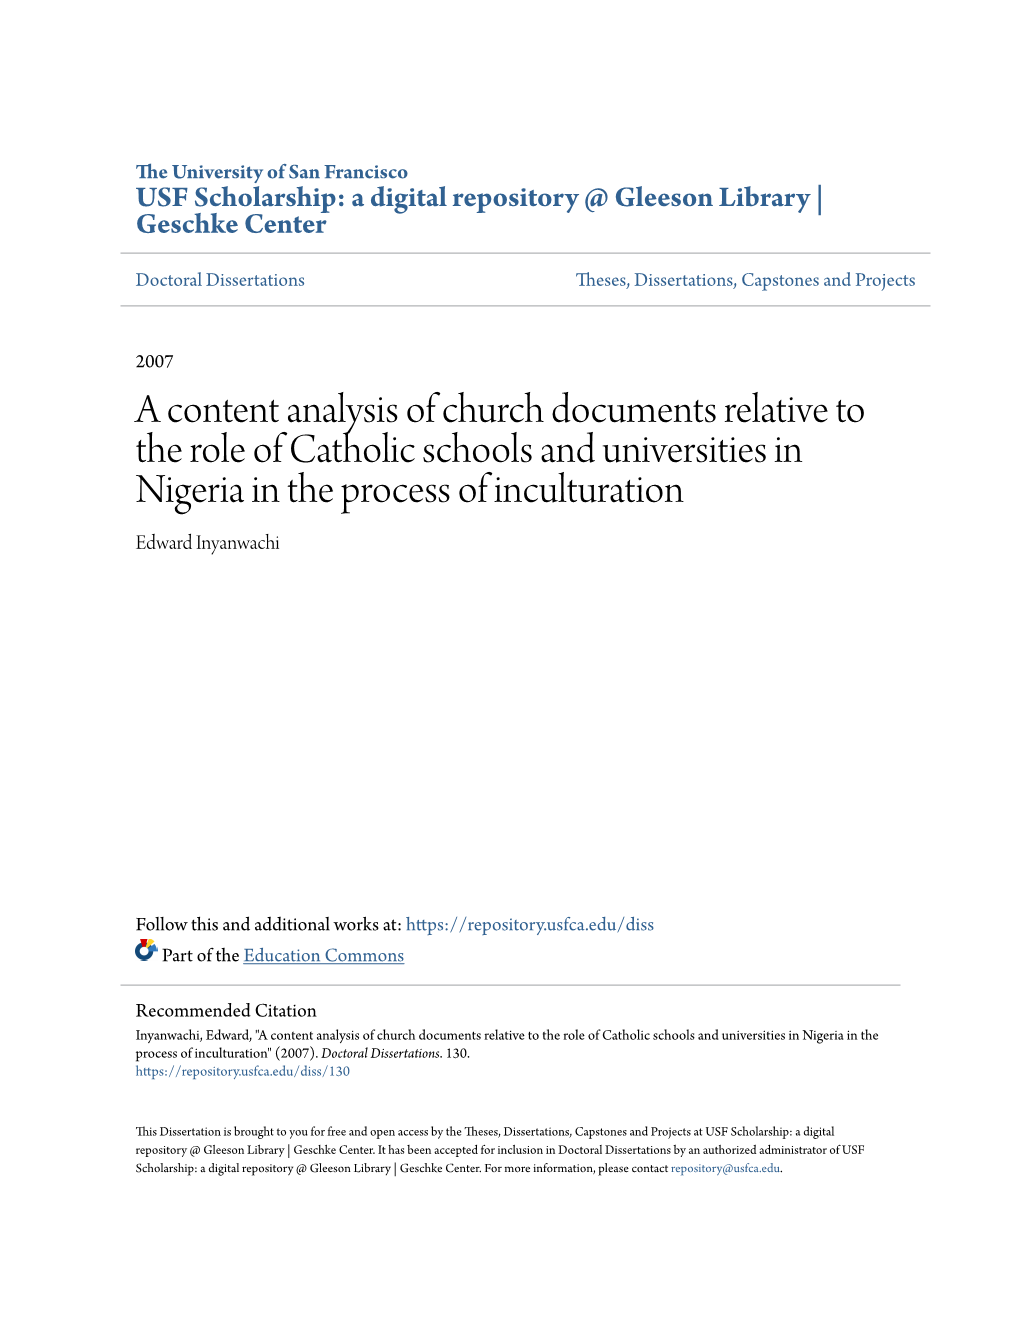 A Content Analysis of Church Documents Relative to the Role of Catholic Schools and Universities in Nigeria in the Process of Inculturation Edward Inyanwachi